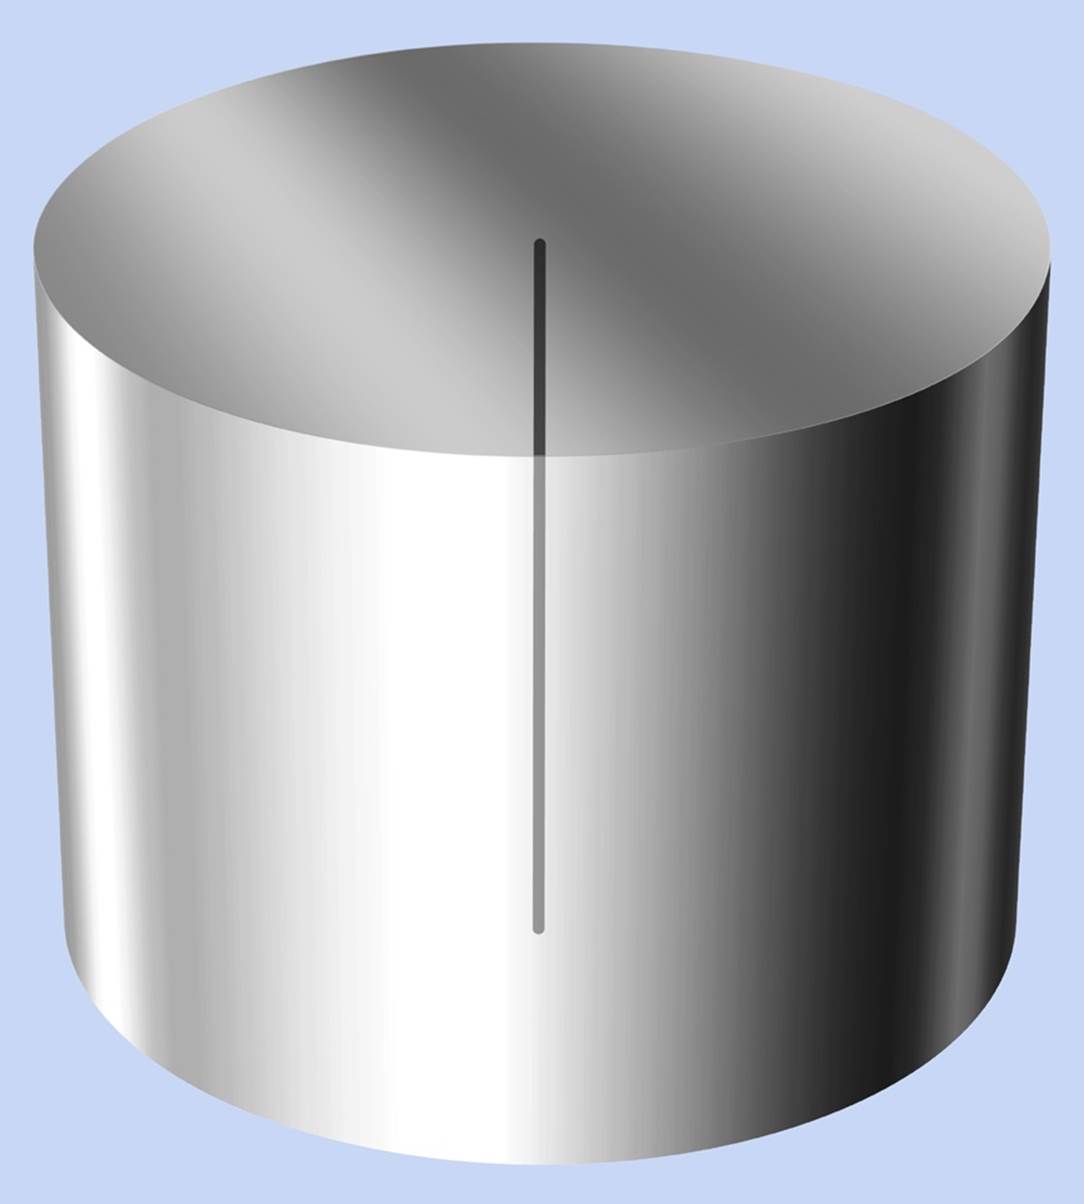 The imaginary line running through the center of the cylinder is its axis.